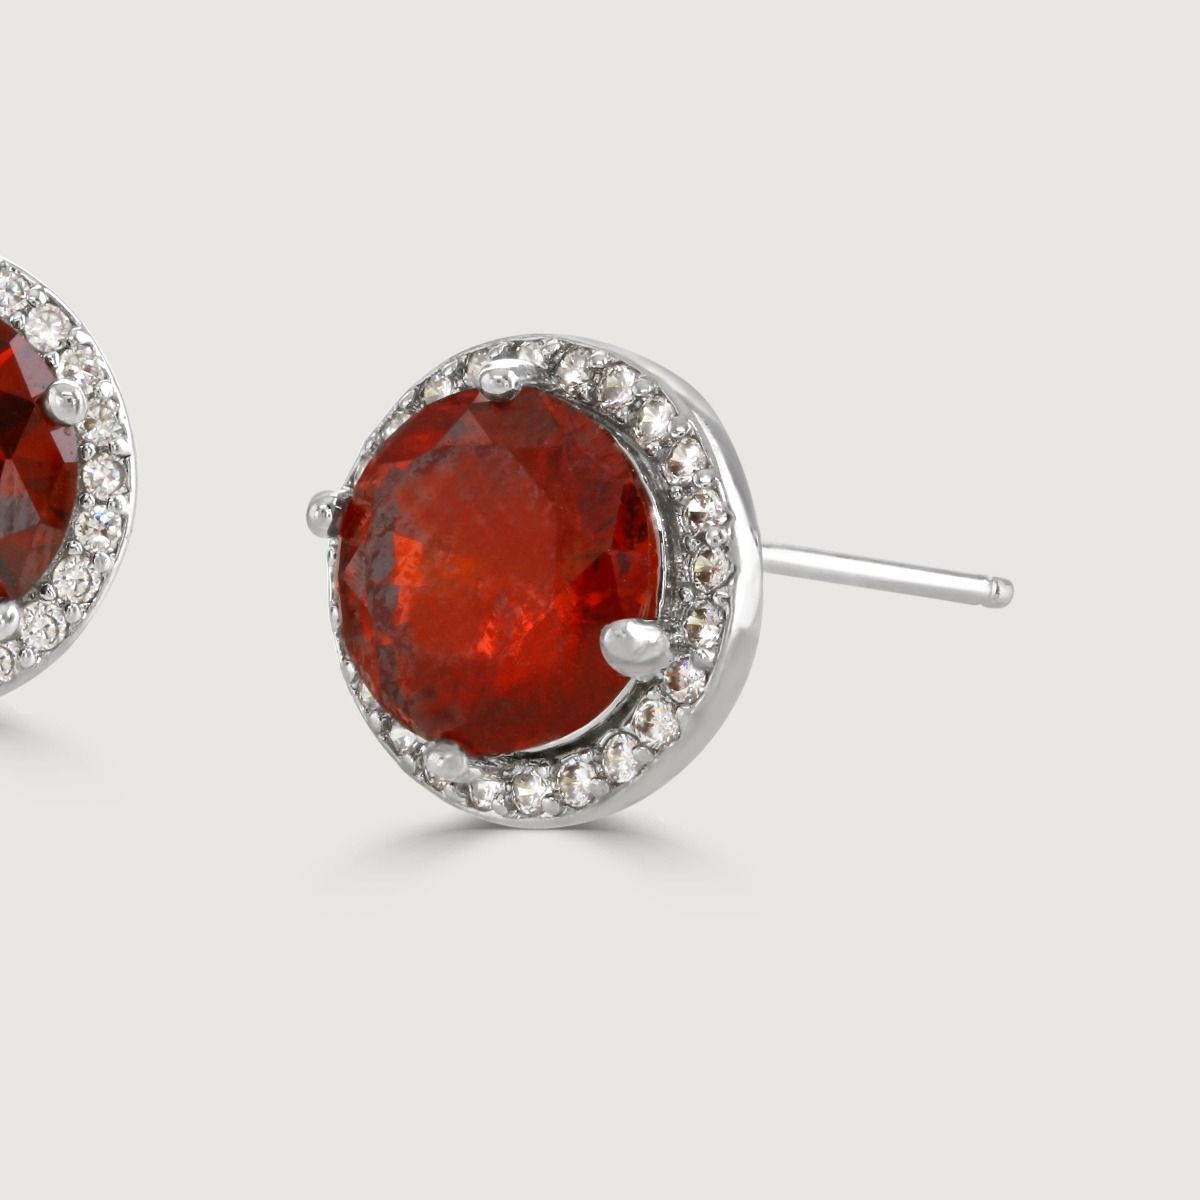 Experience enchantment through our Ruby Halo Earrings. The impressive round-cut centre stone emanates a captivating allure. Effortlessly elevate your style with this exquisite piece, infusing timeless glamour into any ensemble.